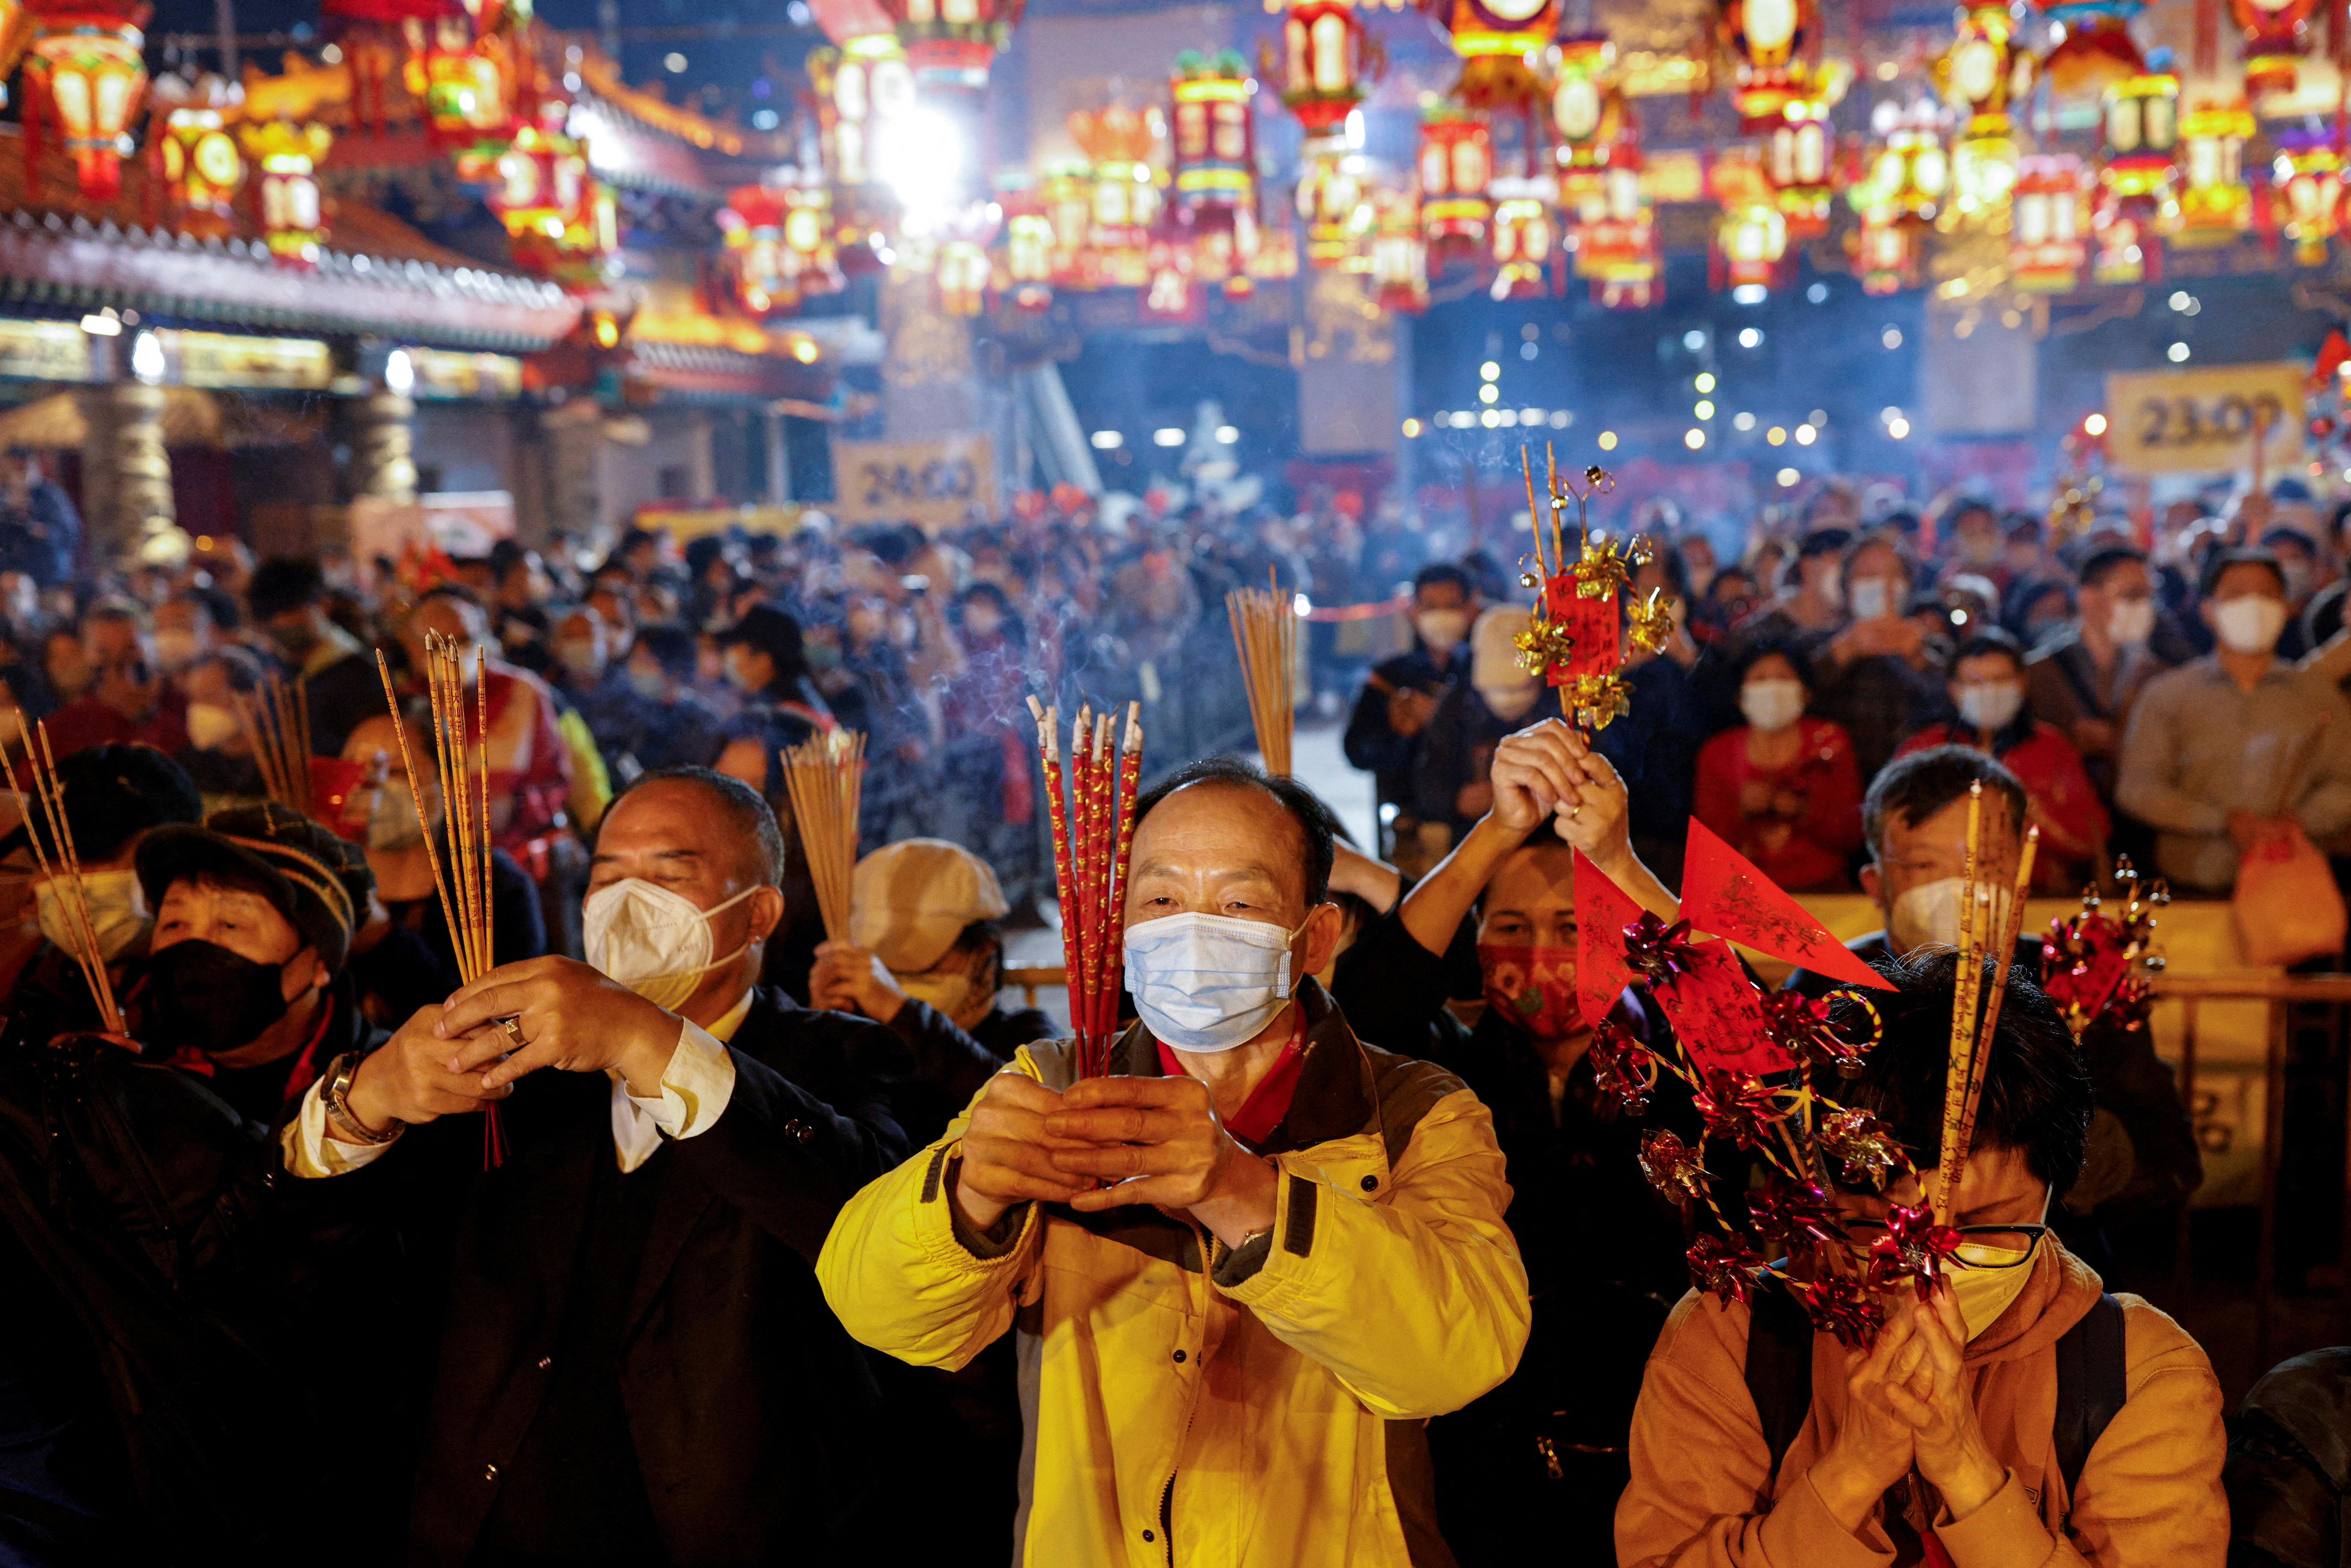 Worshippers make their offerings inside the Wong Tai Sin Temple to celebrate the Lunar New Year, in Hong Kong